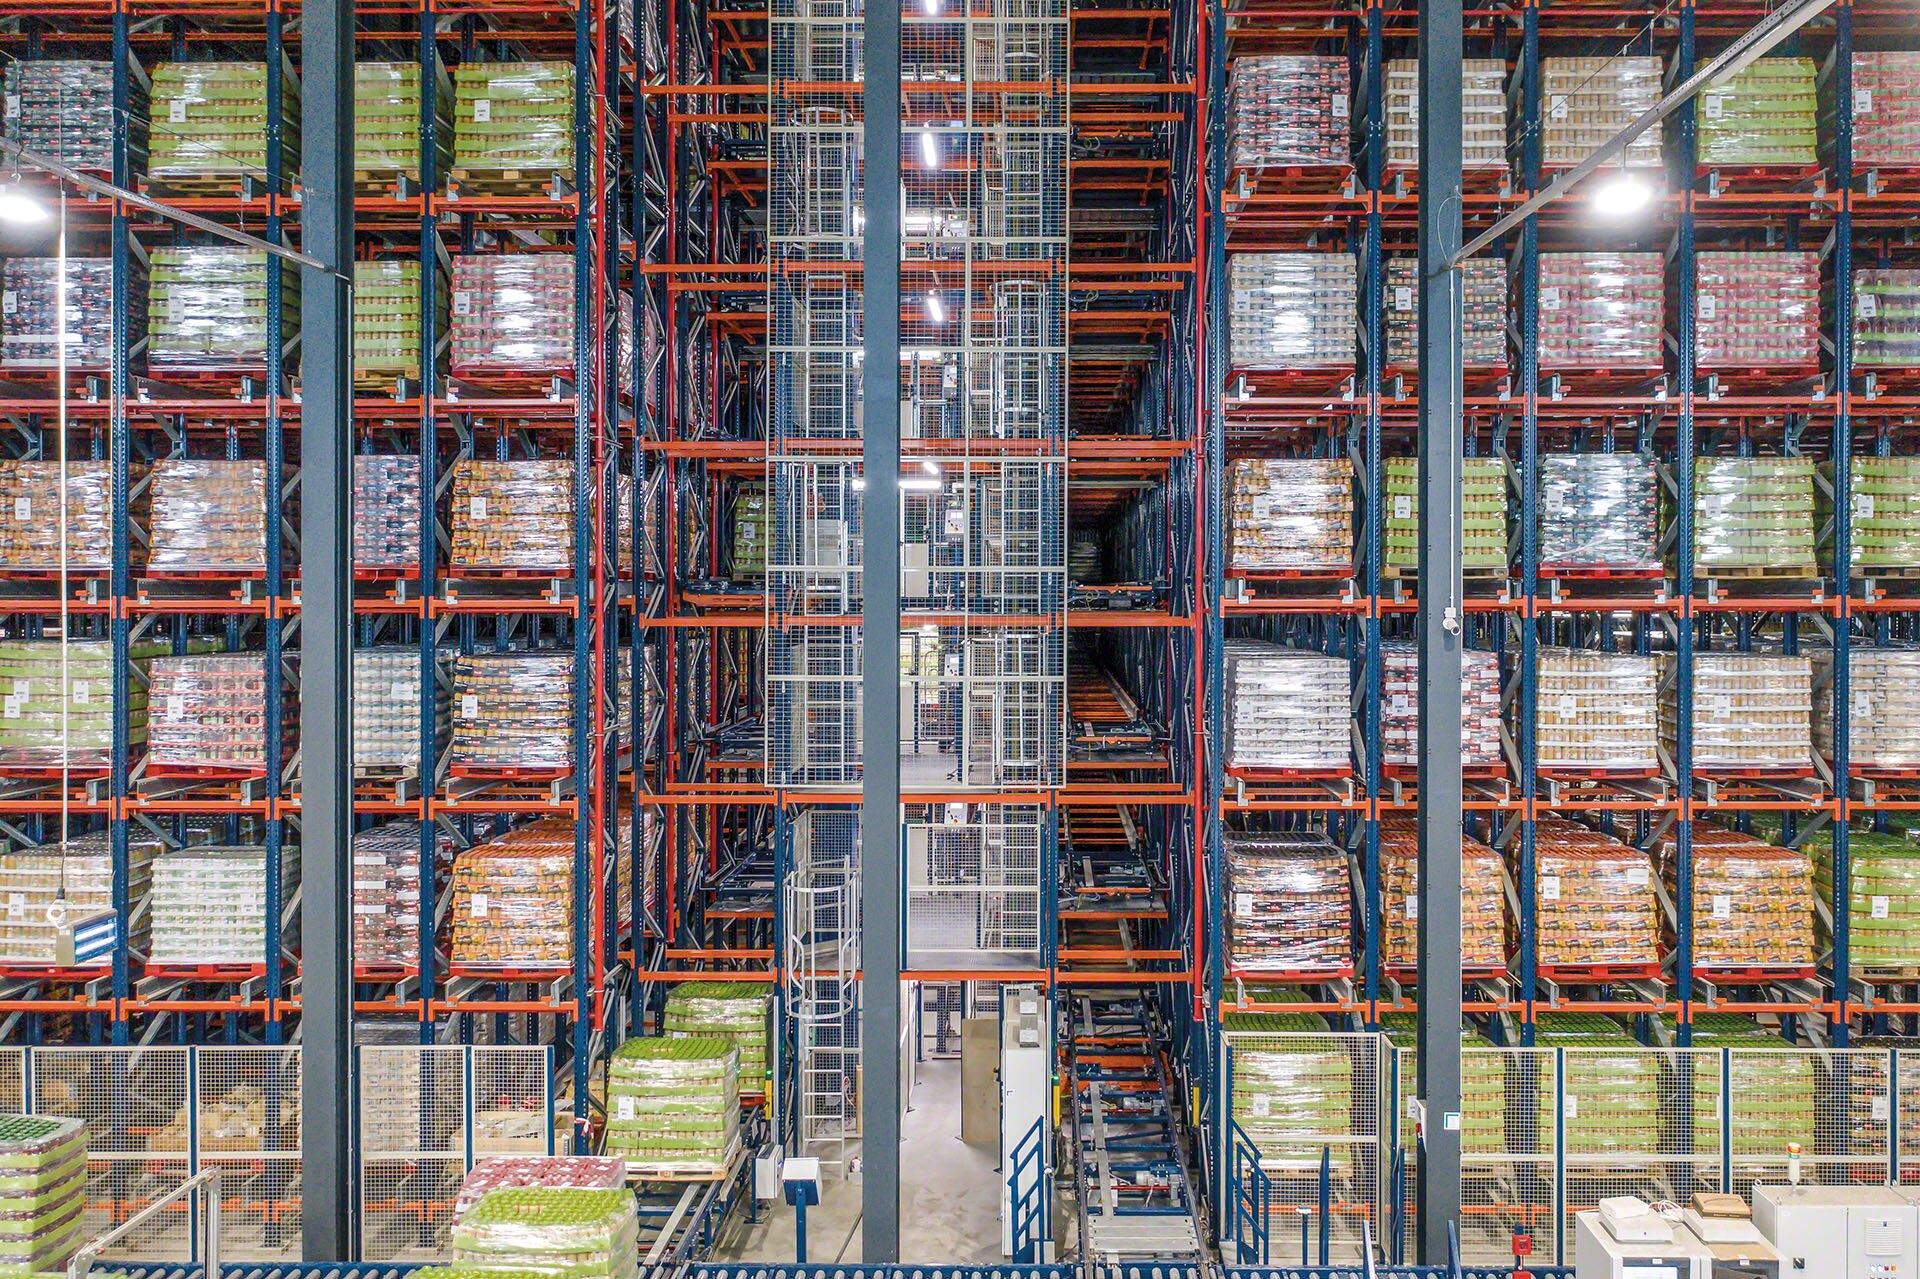 In low-rotation warehouses, it is not necessary to have a shuttle for each lane. Instead, one lift platform is sufficient to place the shuttle according to needs